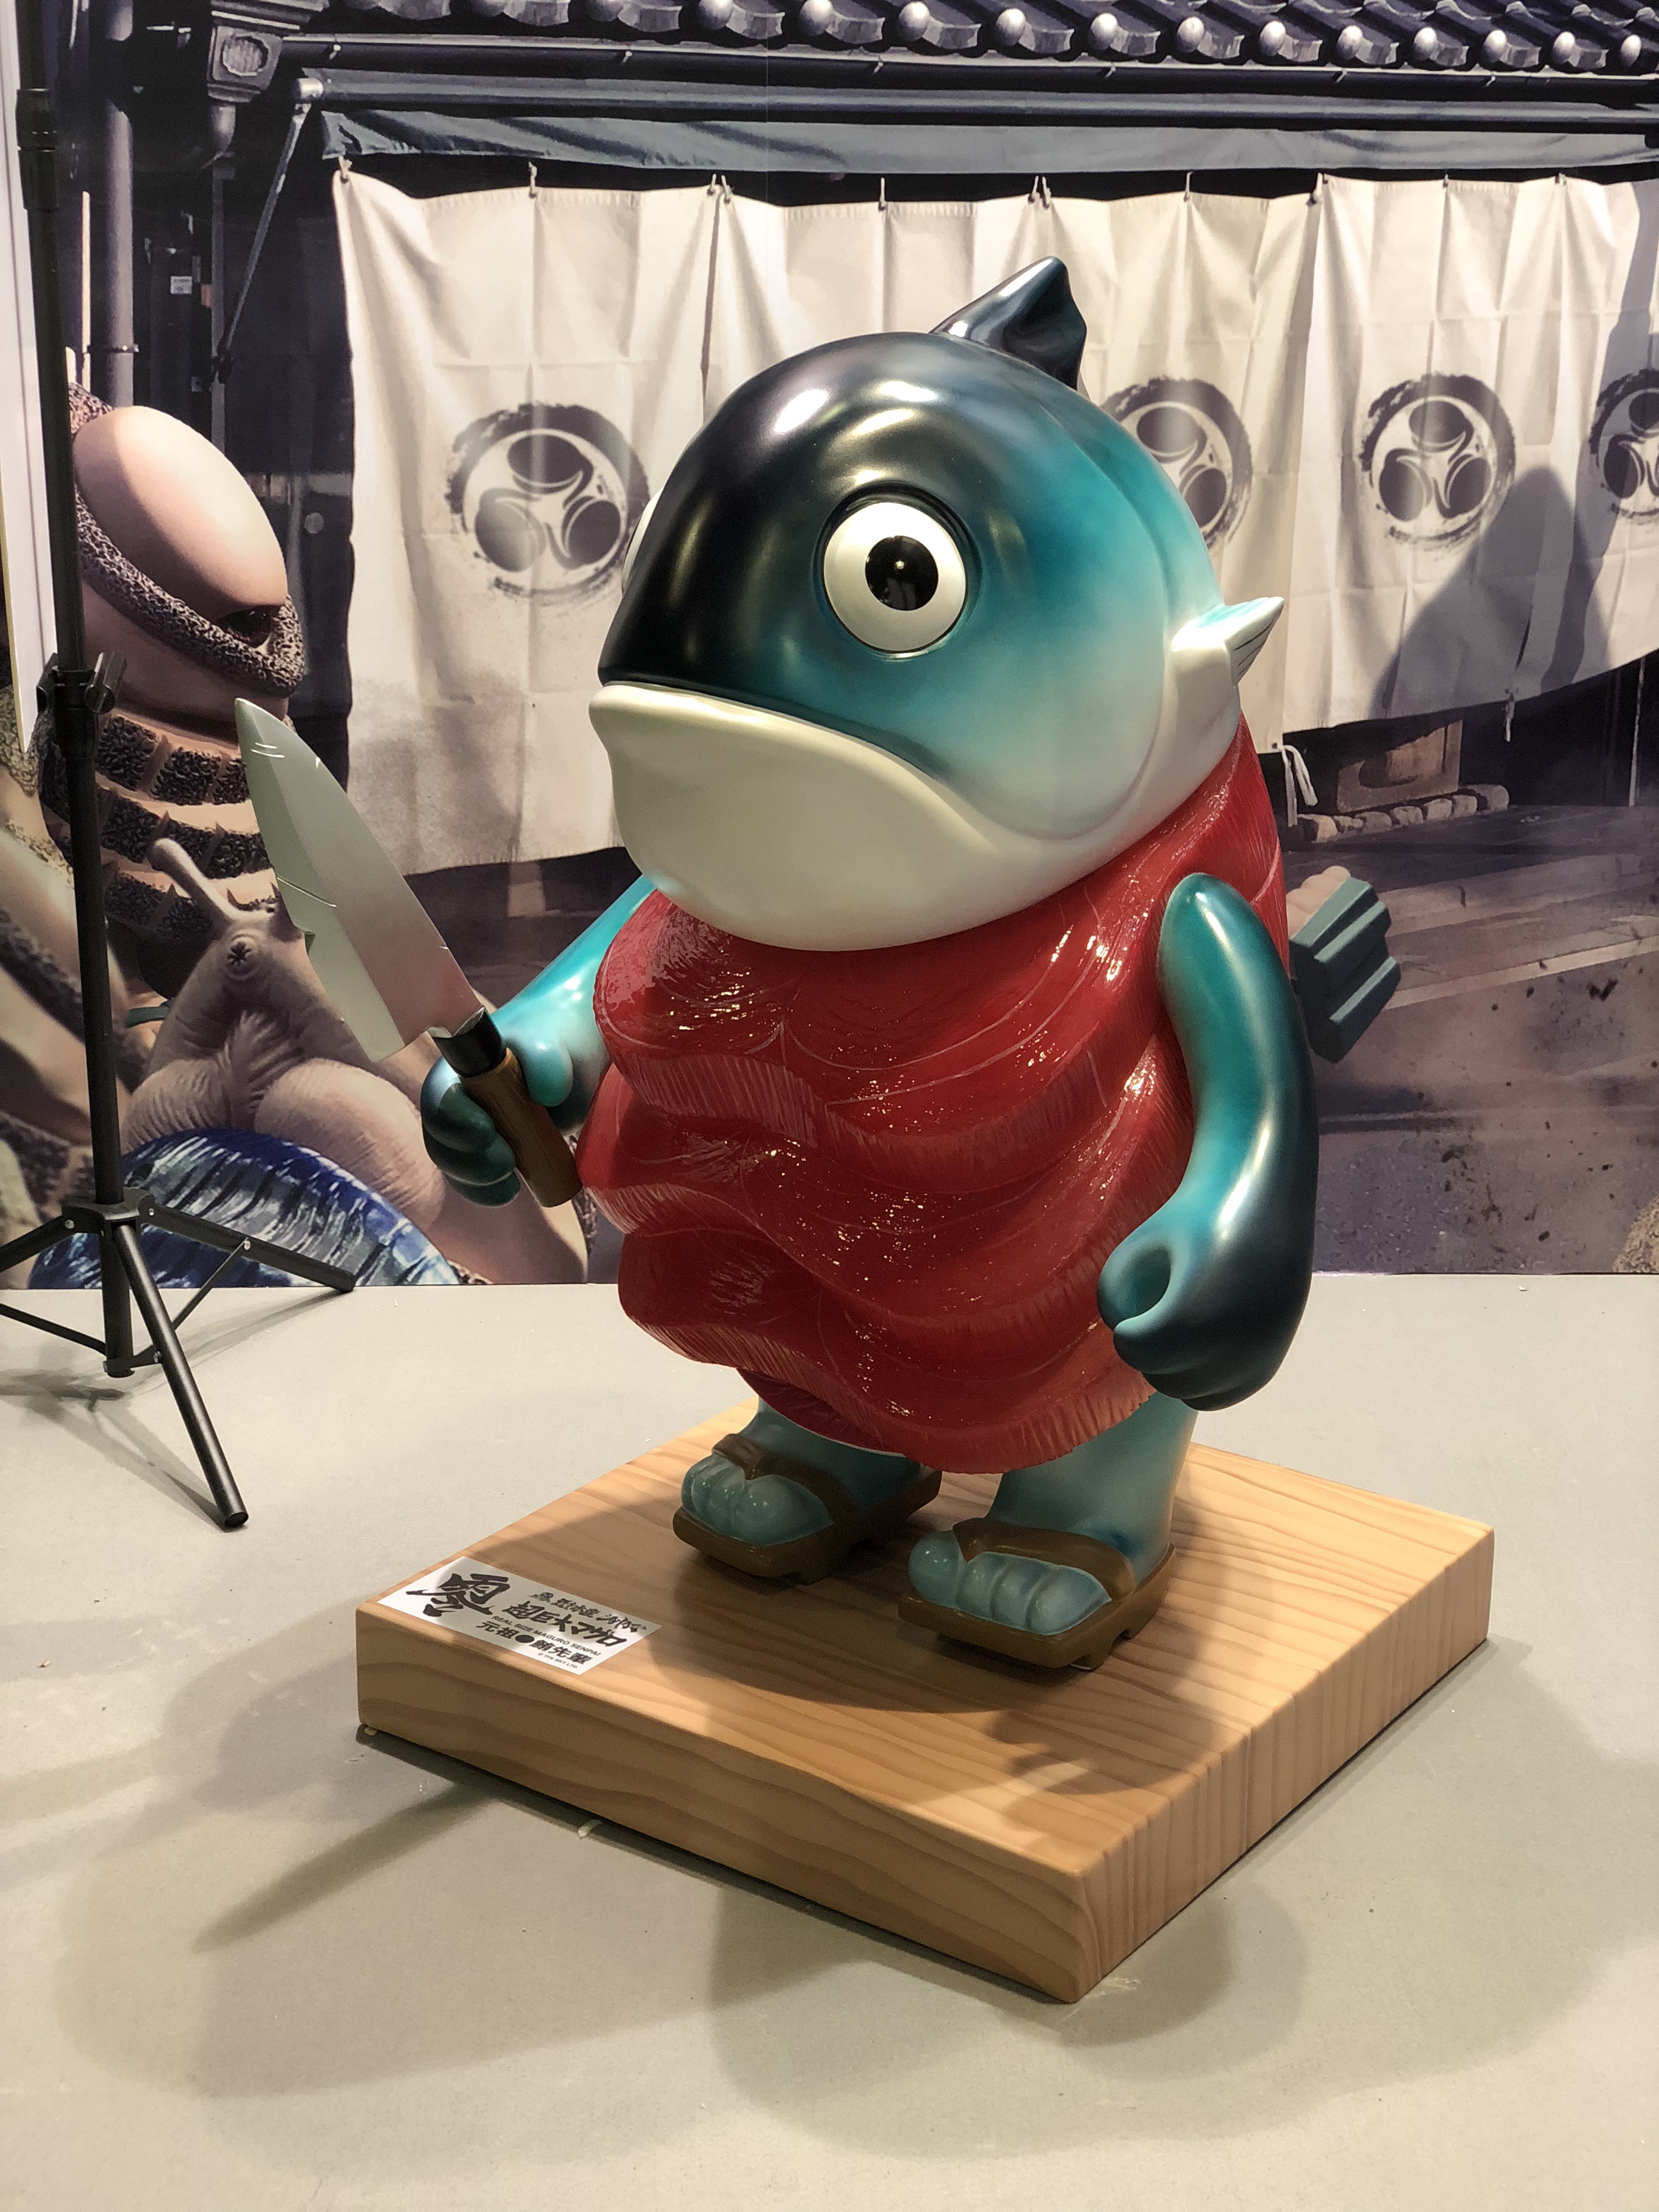 2018 Shanghai Toy Show (STS) - iphone X -01- - 블로그